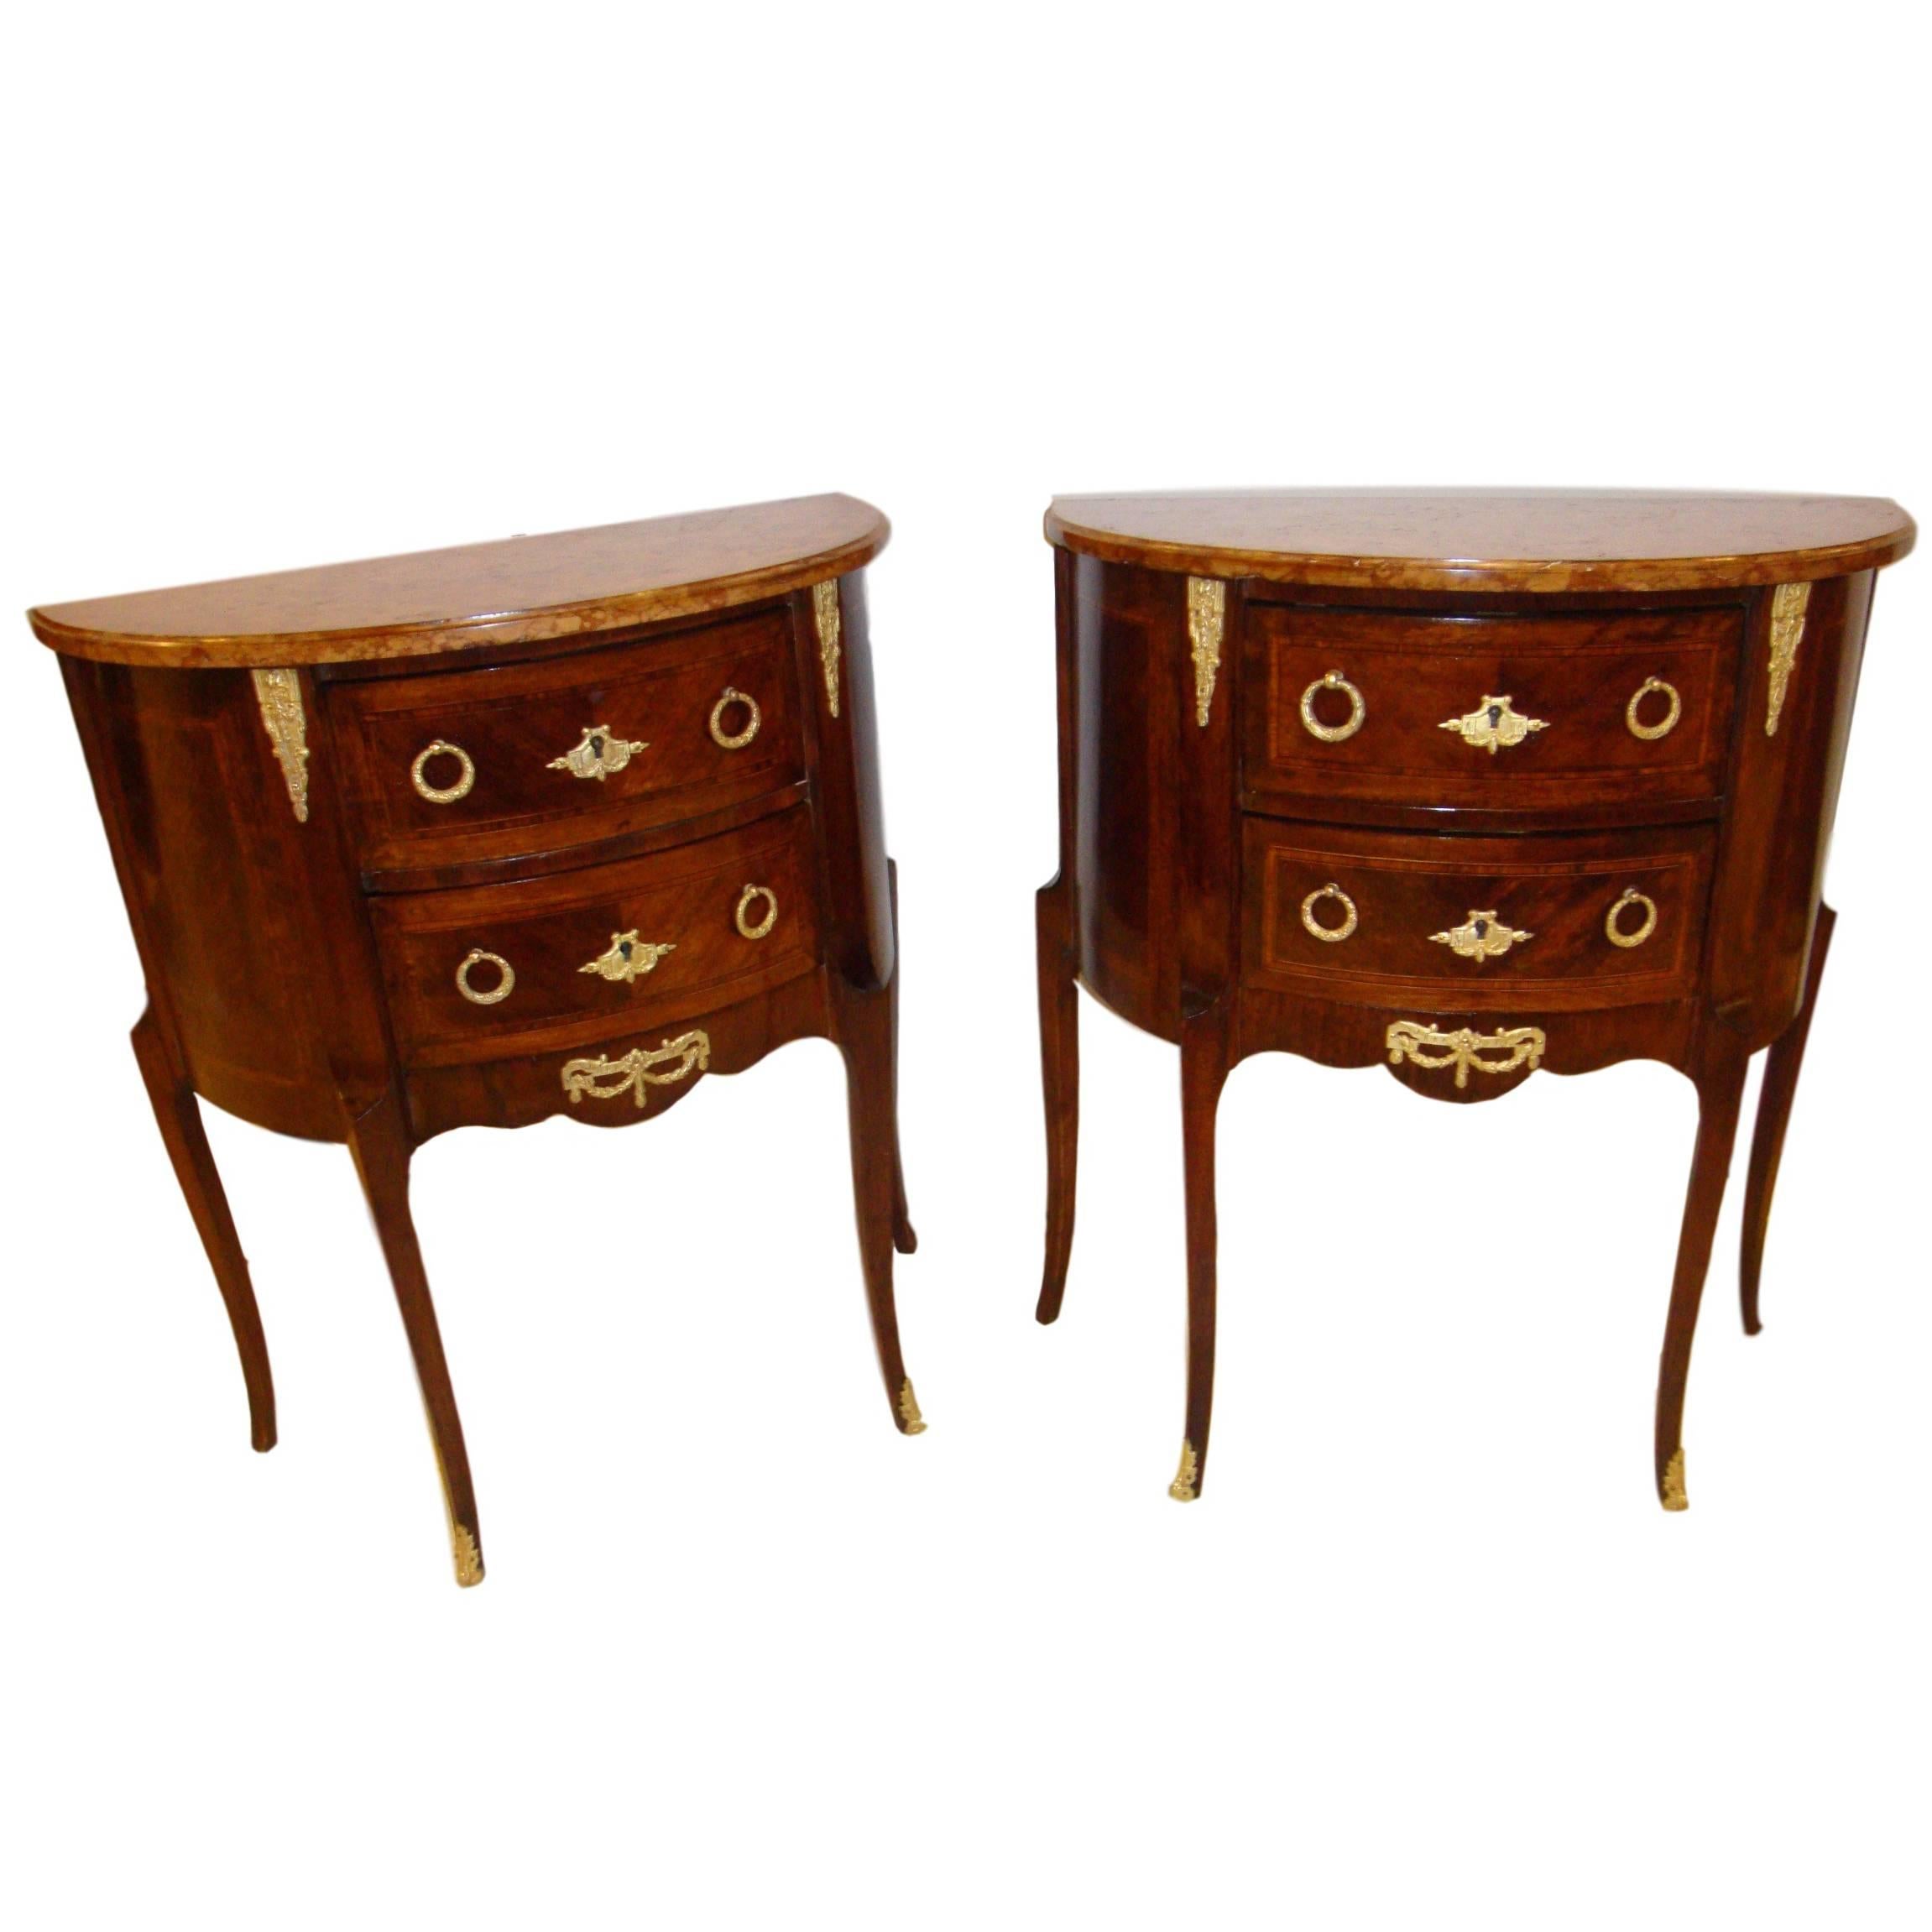 Pair of French Louis XV Style Demi Lune Diminutive Commodes / Nightstands